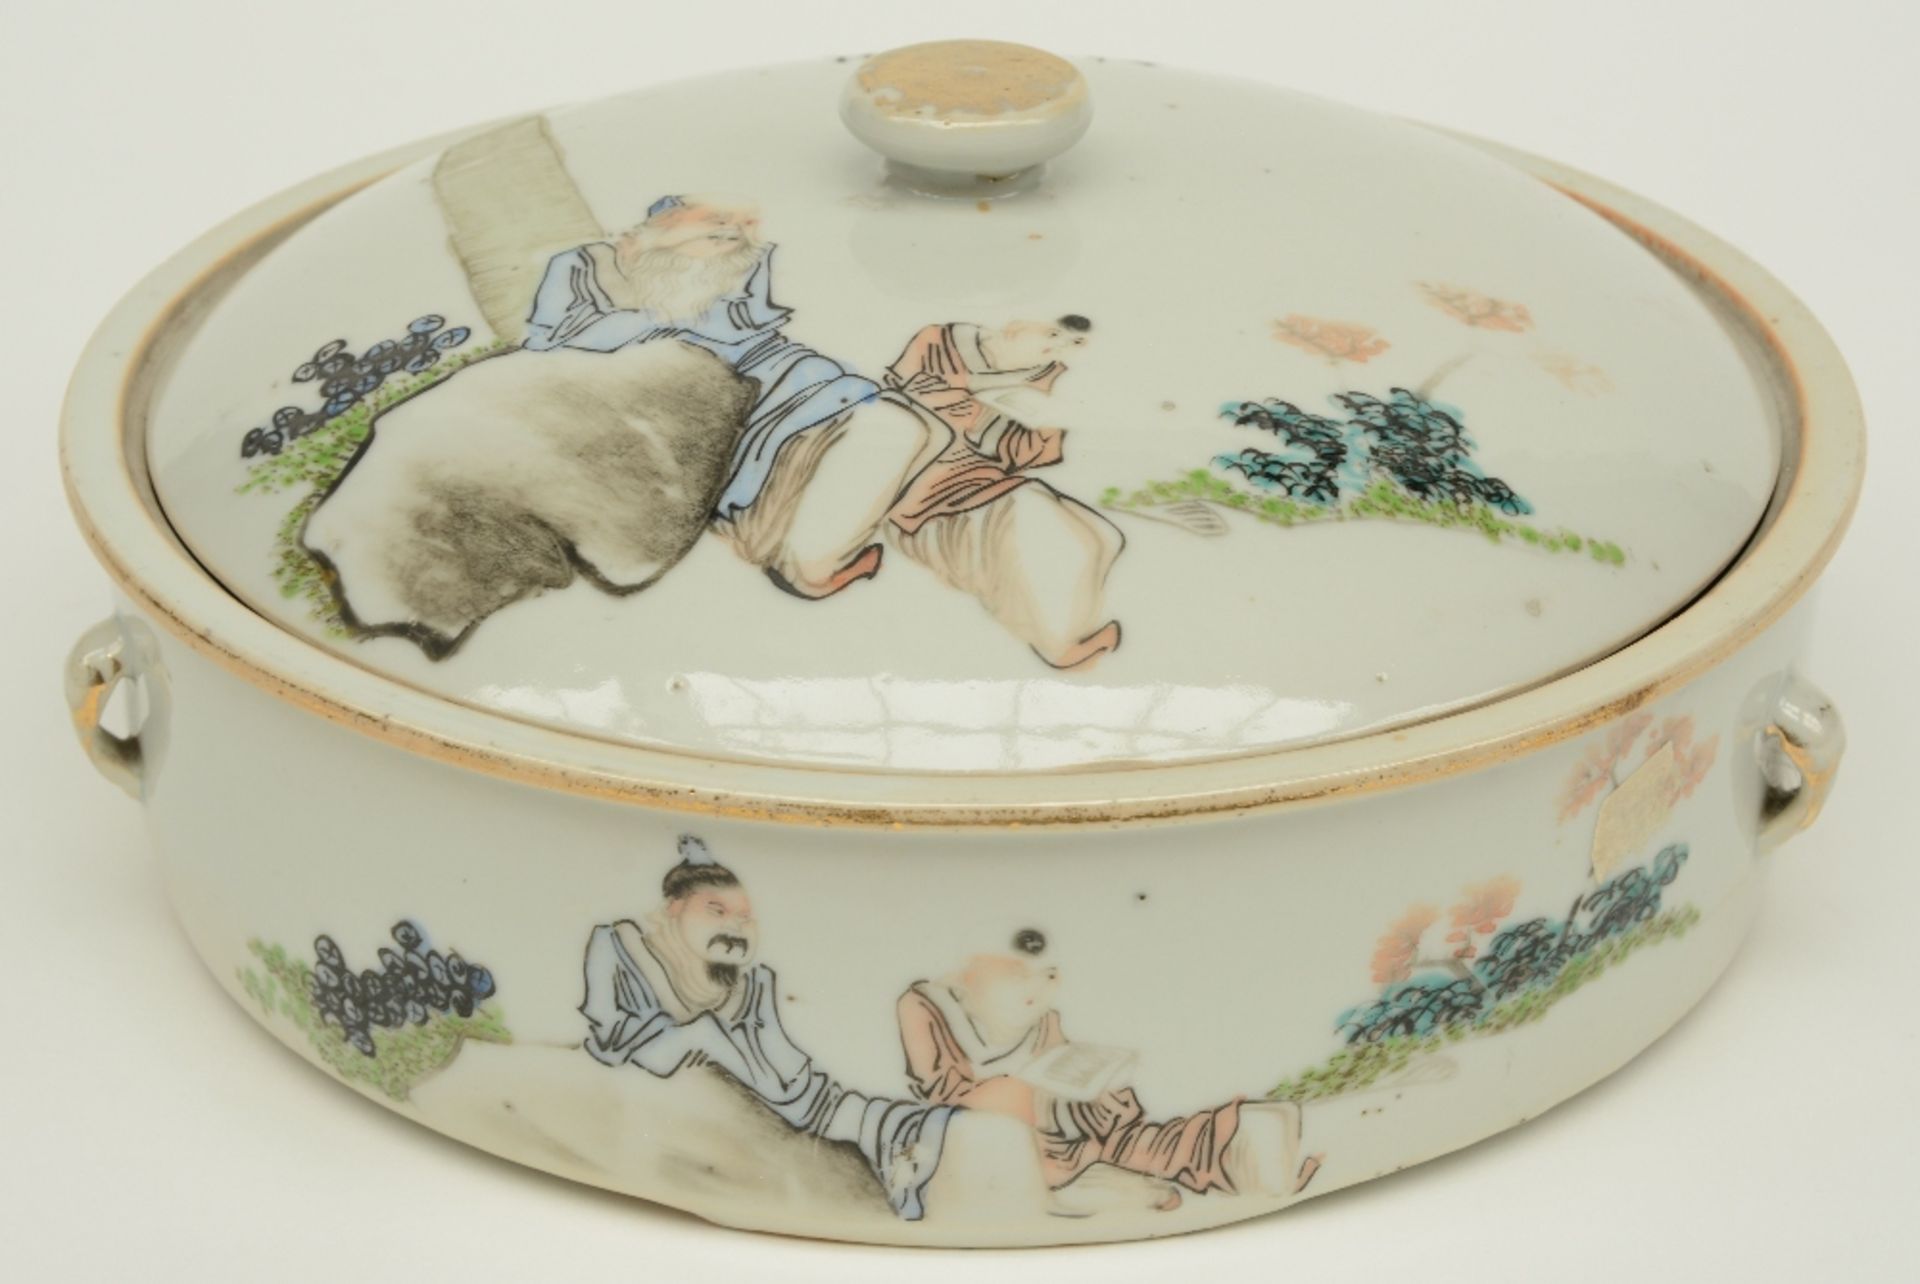 A Chinese bowl with cover, polychrome decorated with figures, H 11,5 - Diameter 24,5 cm